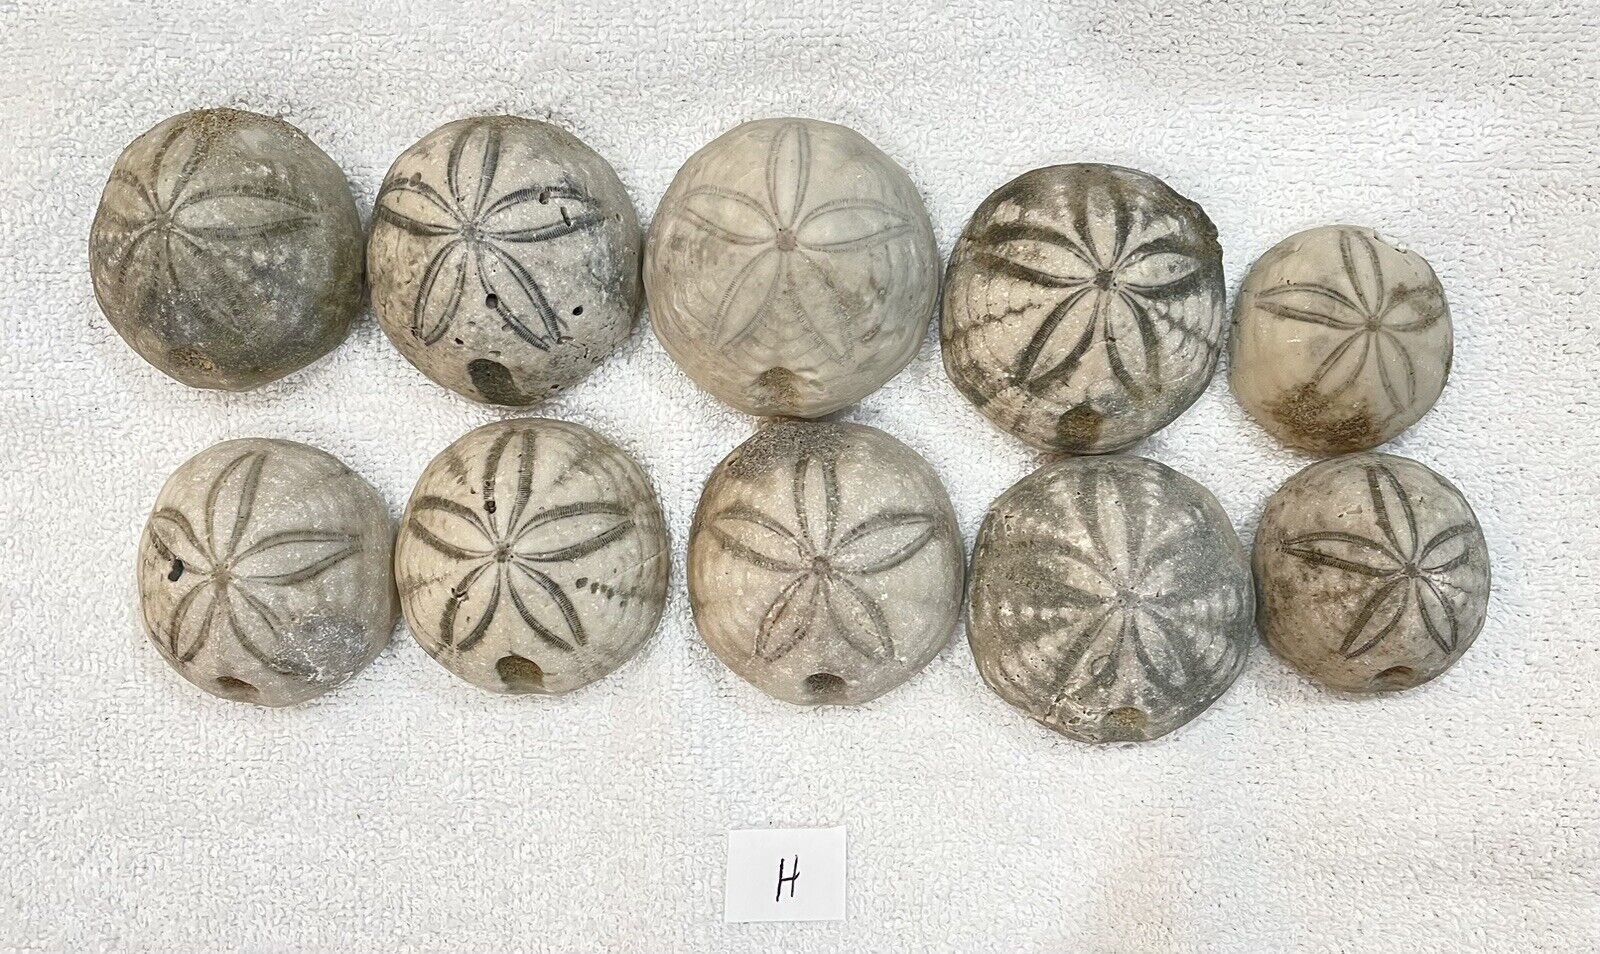 Set Of 10 Fossilized Sea Biscuits From Holden Beach North Carolina